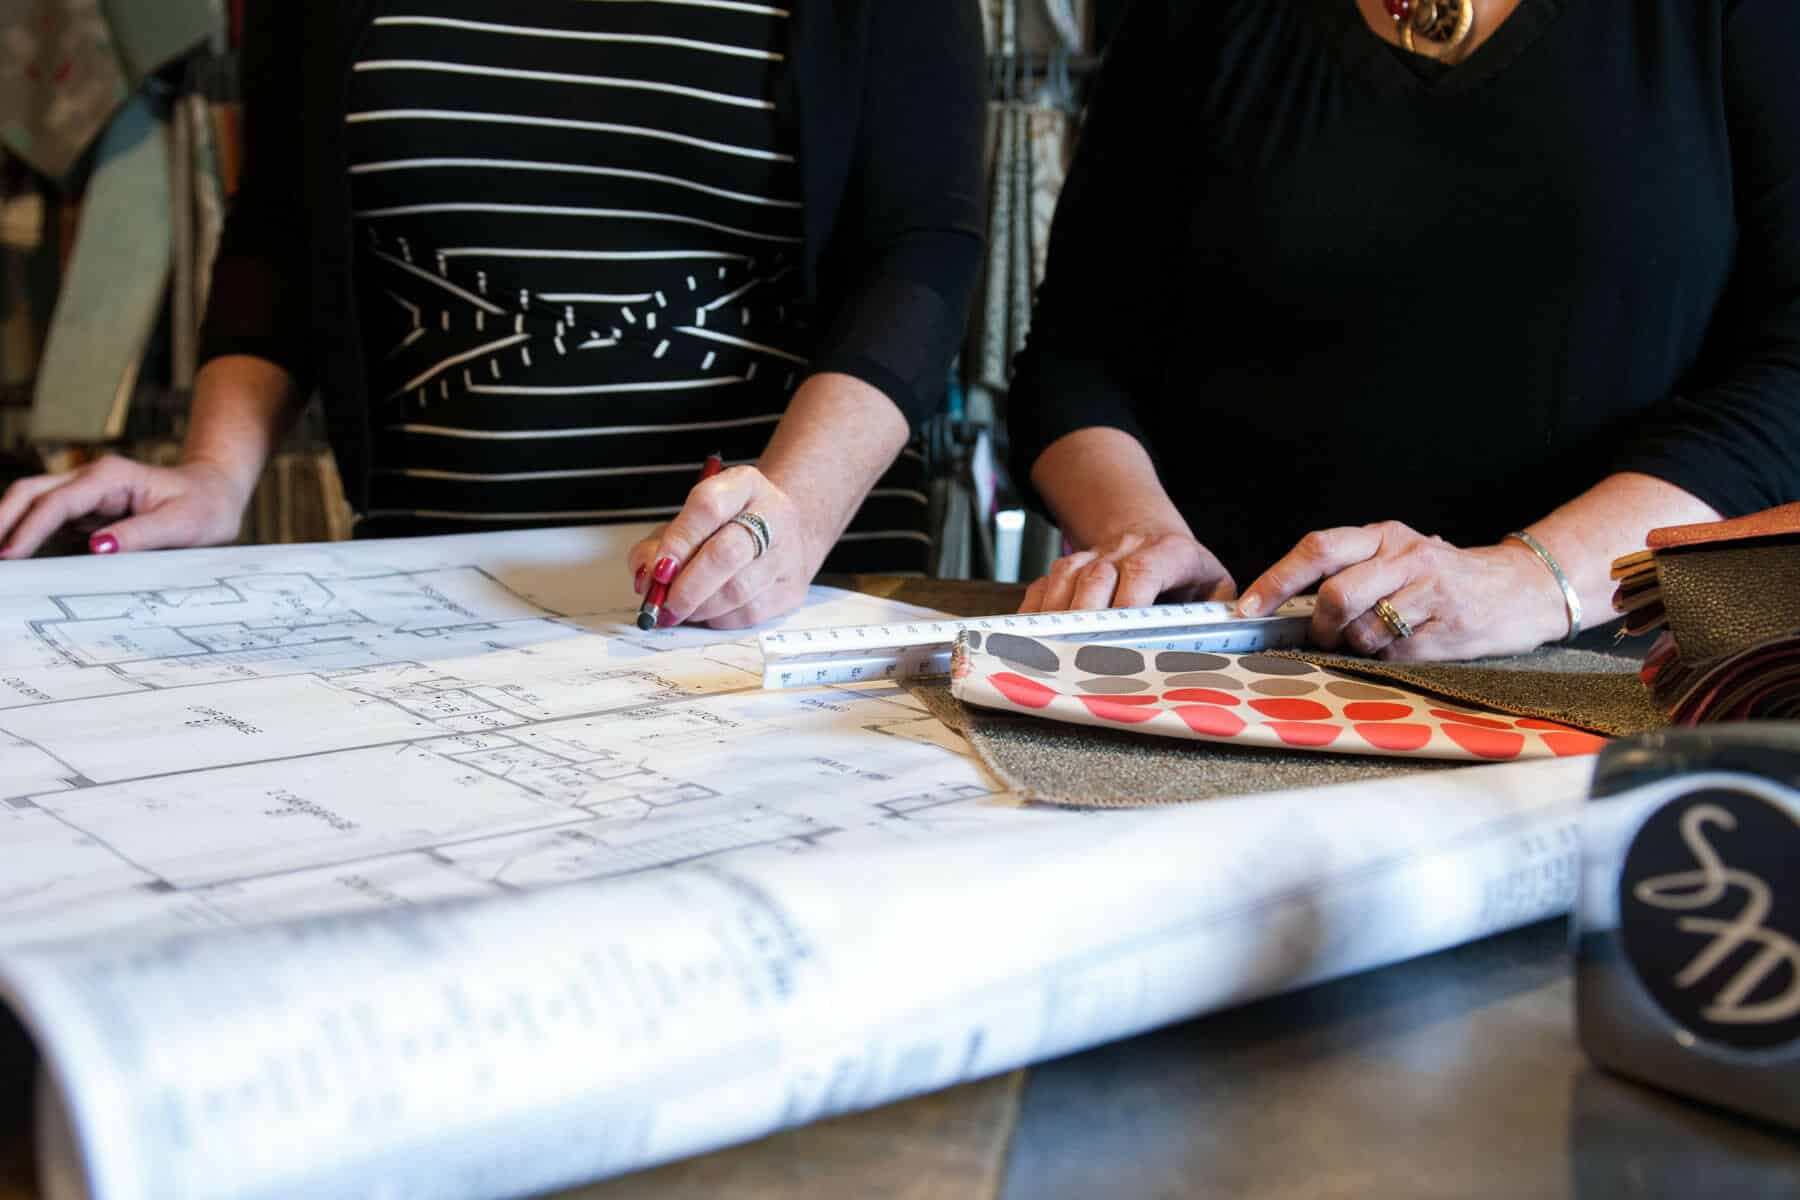 Utah Interior Designers Studying Home Blueprints and Color Schemes